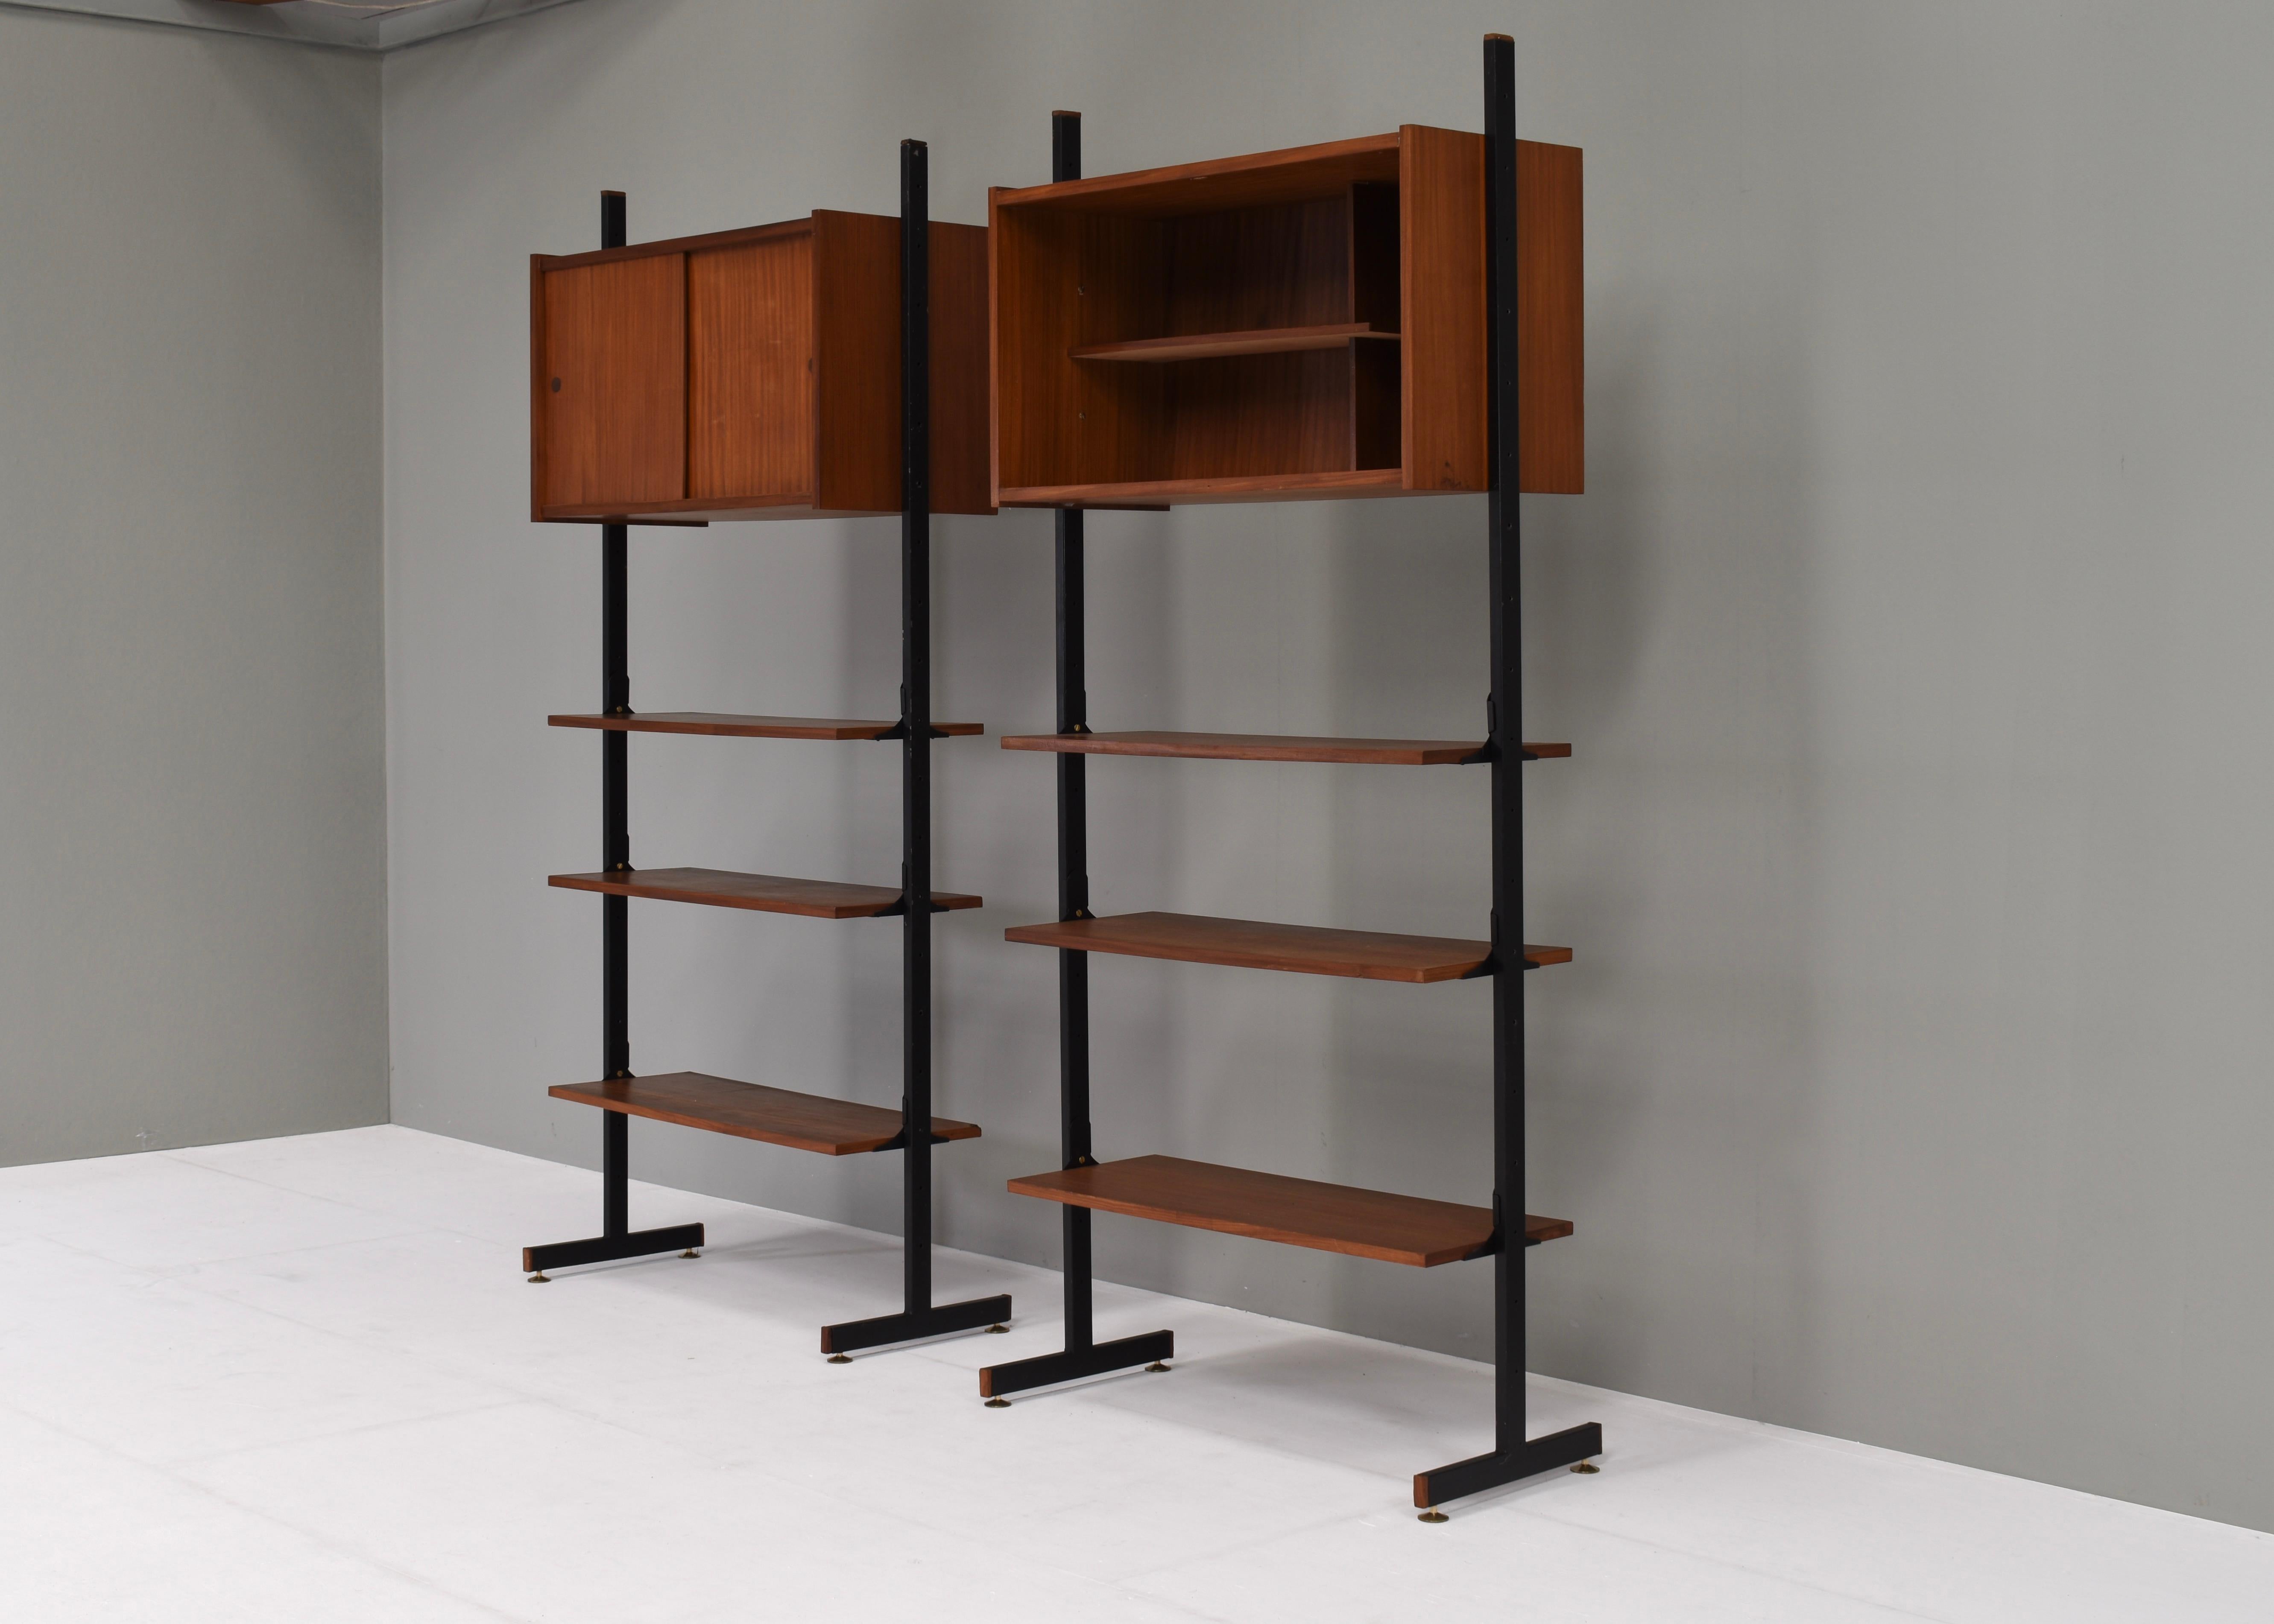 Italian room divider / wall unit in teak with brass details - Italy, circa 1950-70
The wall unit can be set-up in different ways.
The brass feet are adjustable in height for leveling.
Designer: Unknown
Manufacturer: Unknown
Country: